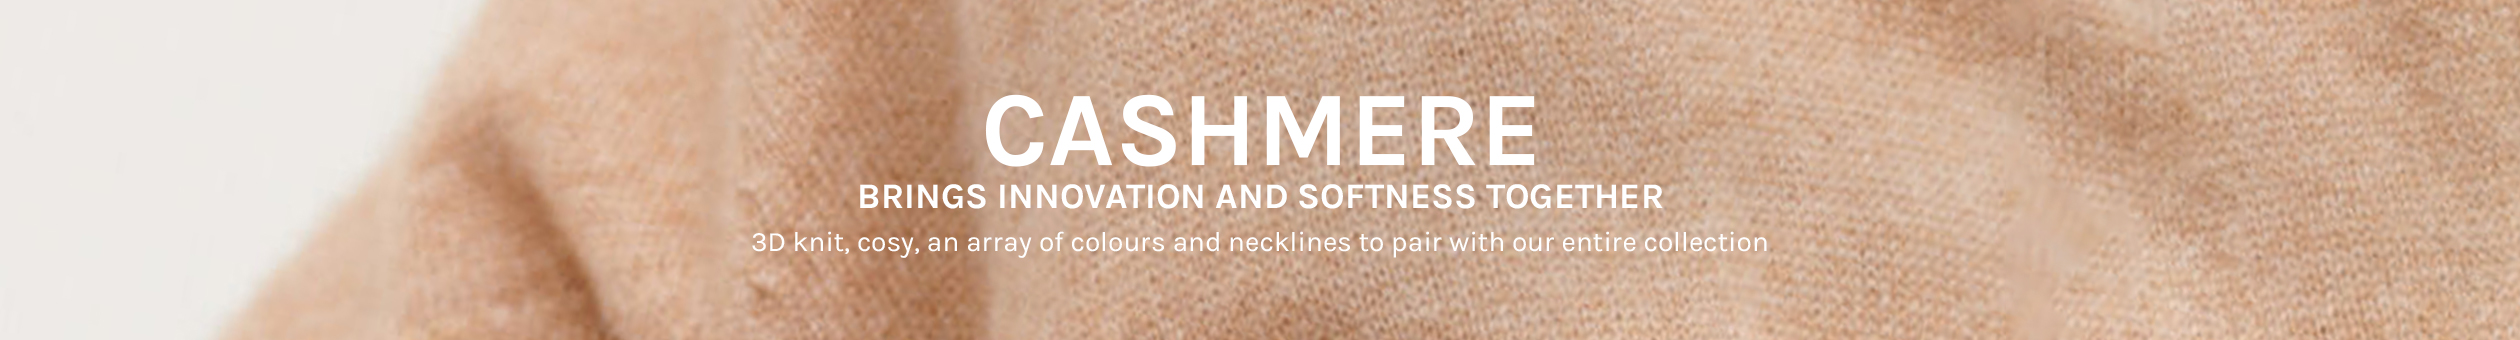 Our cashmere